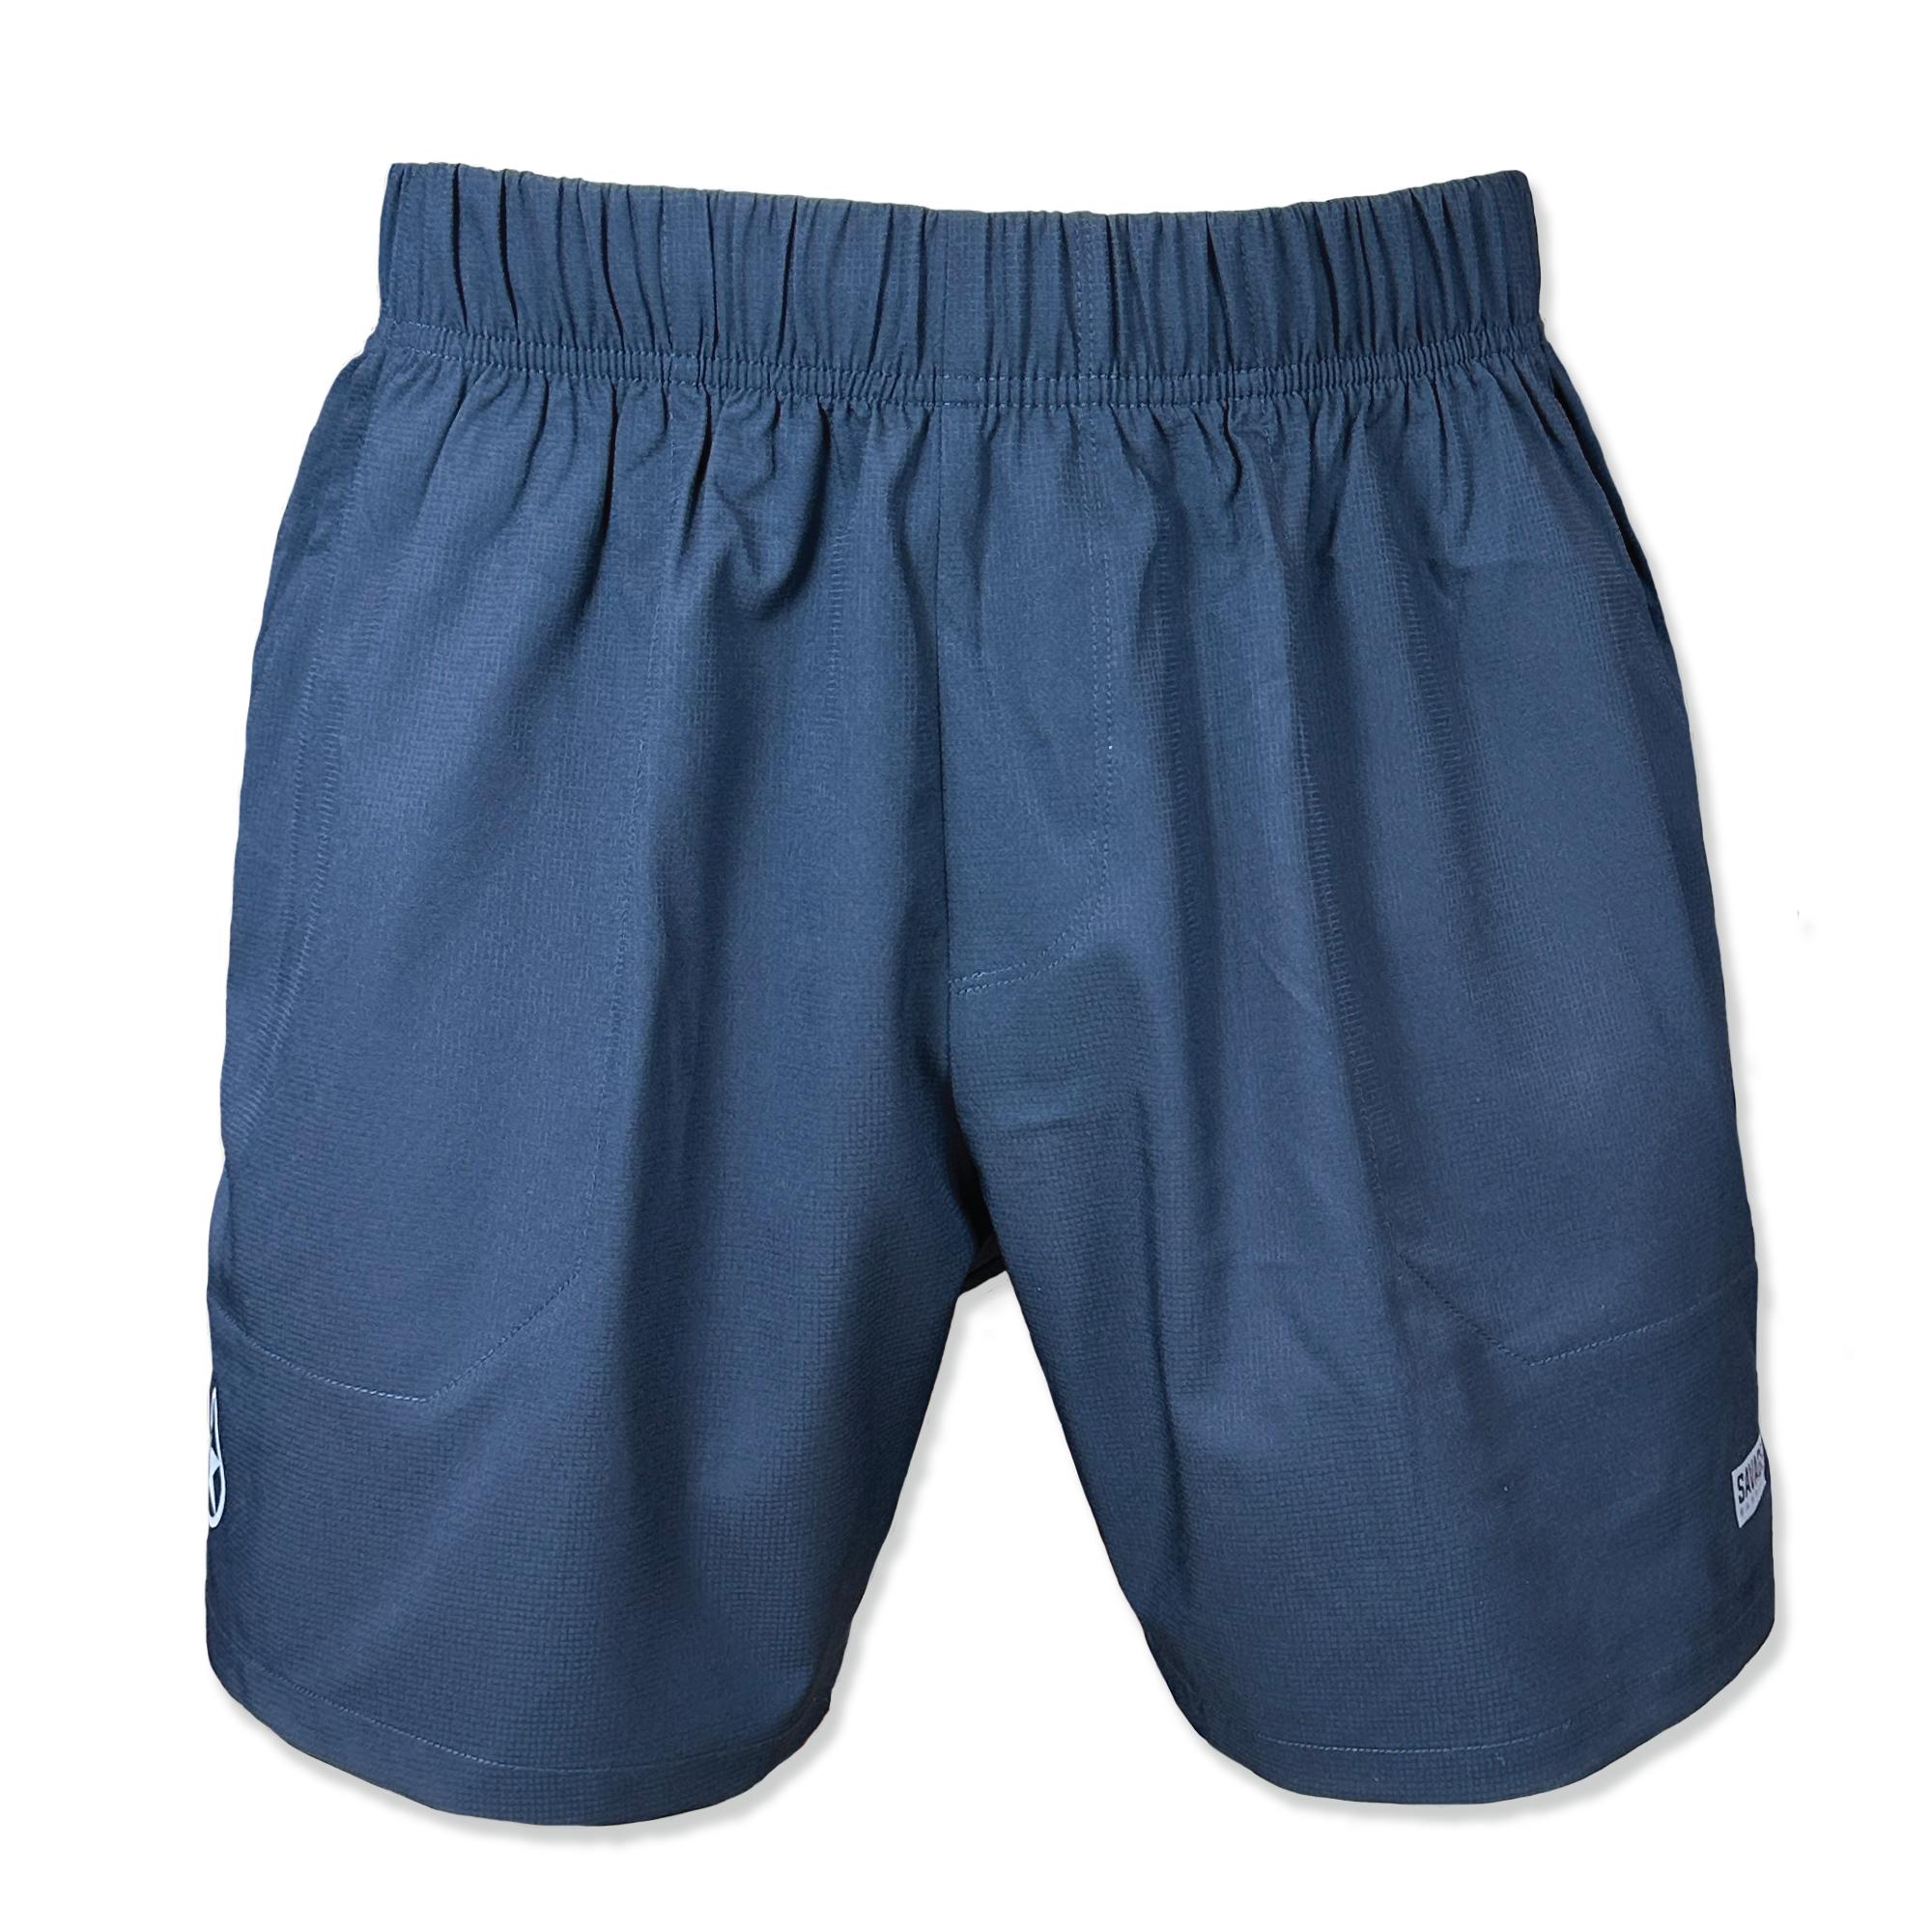 Men's Shorts - Competition 3.0 - Midnight, 2X-Large / Midnight product